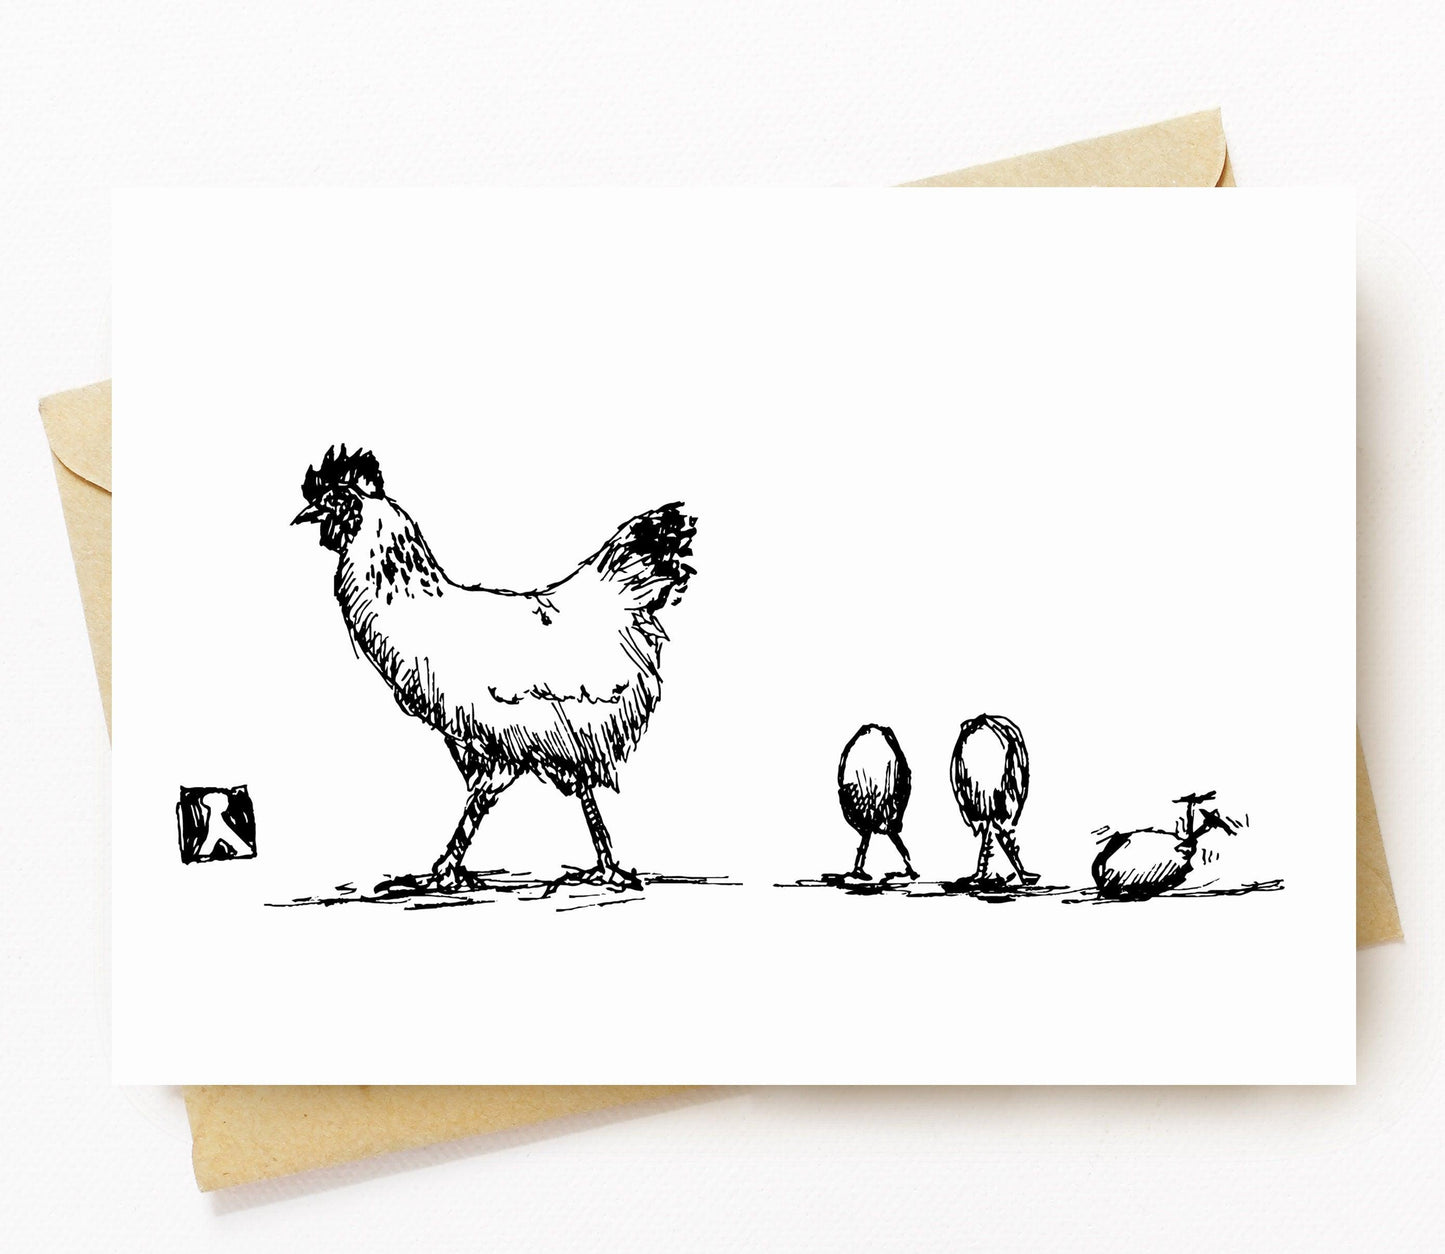 BellavanceInk: Greeting Card With A Pen & Ink Drawing Of A Chicken Walking Her Egg Chicks 5 x 7 Inches - BellavanceInk